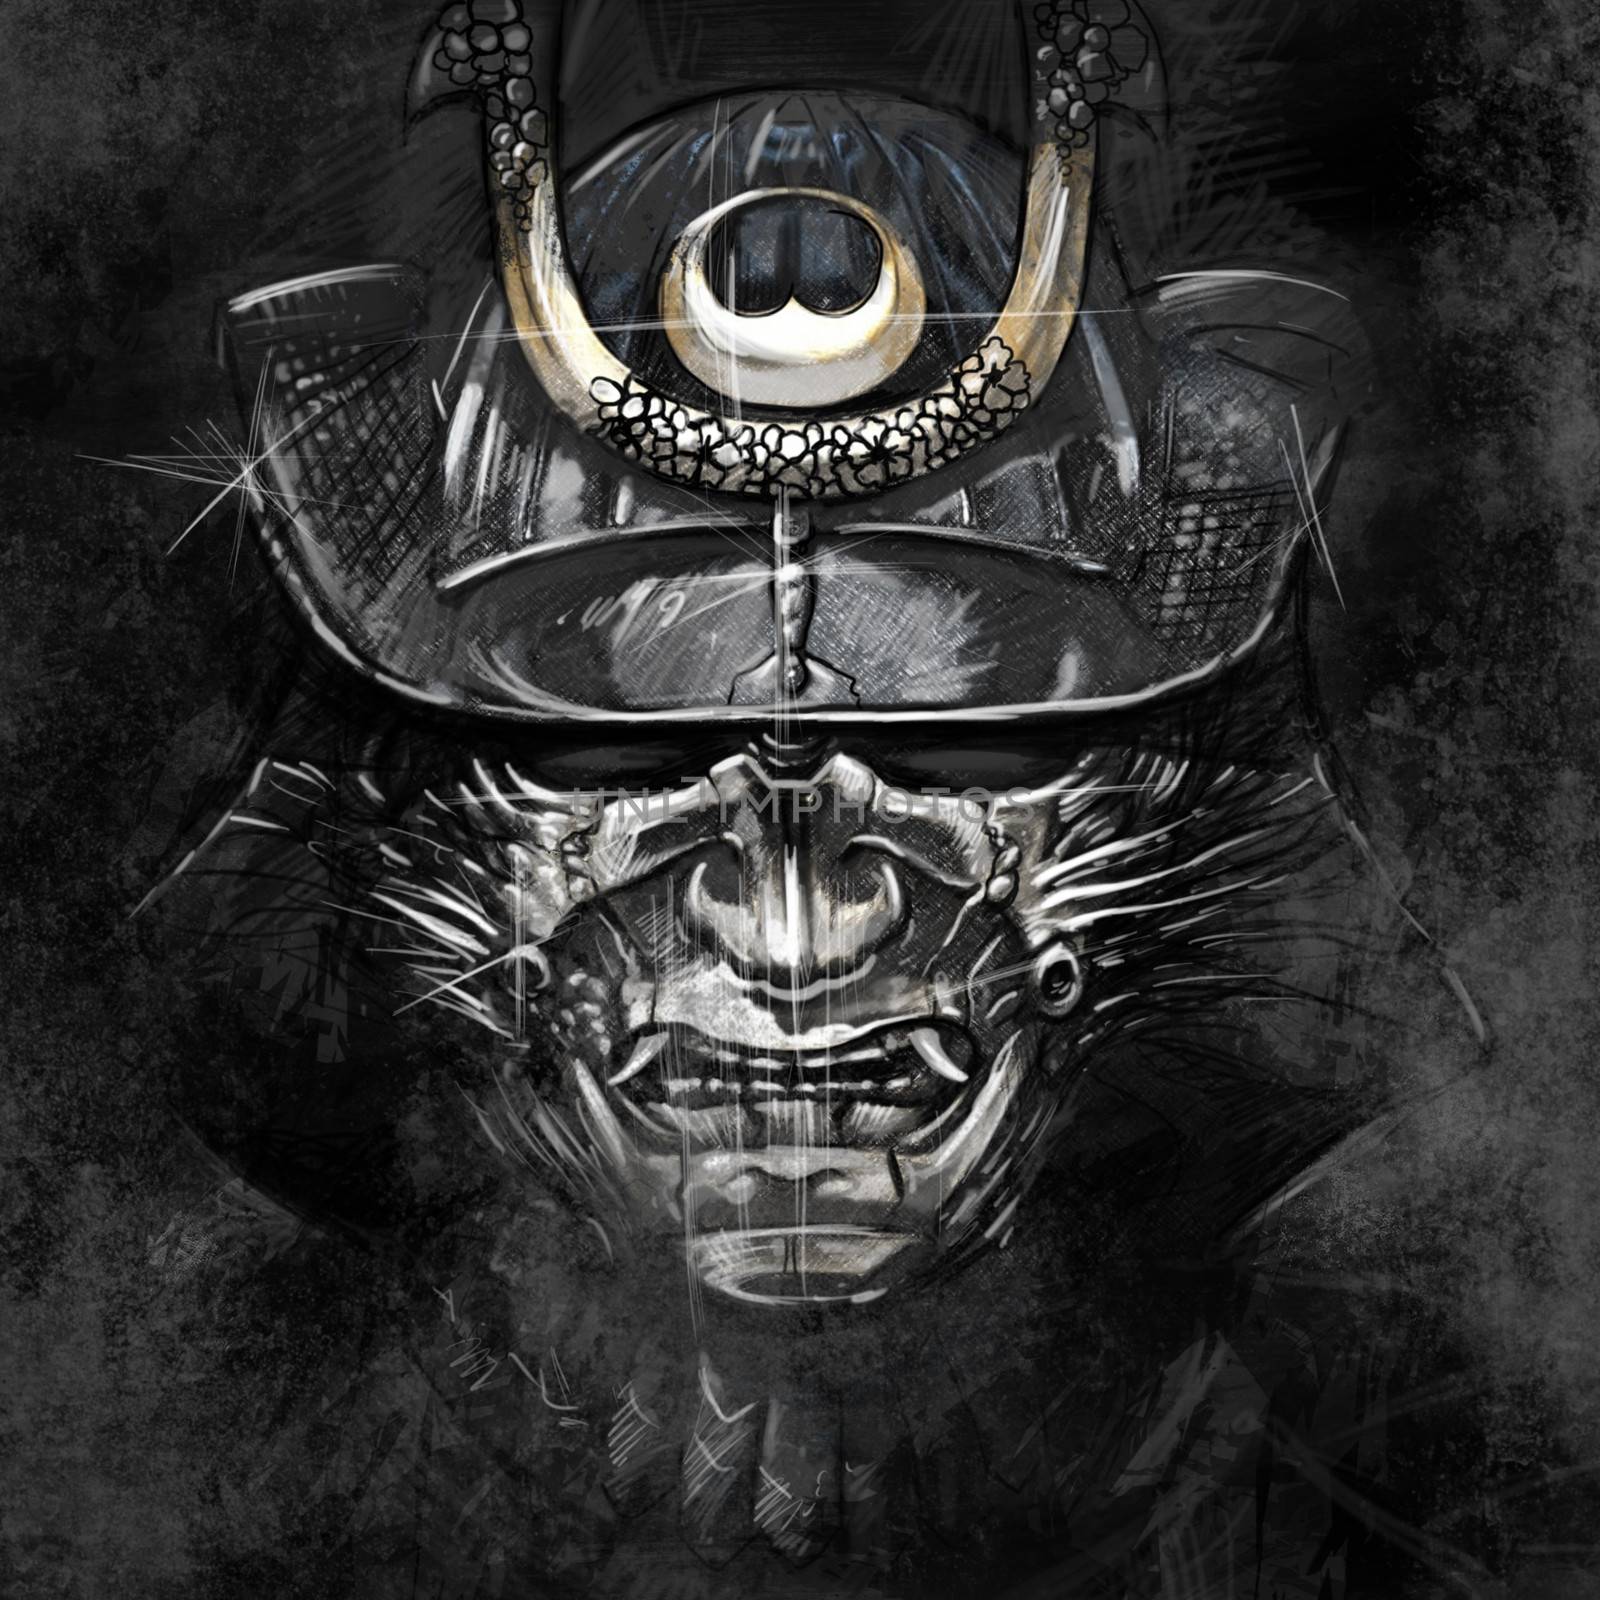 illustrations from a Japanese samurai warrior mask by FernandoCortes